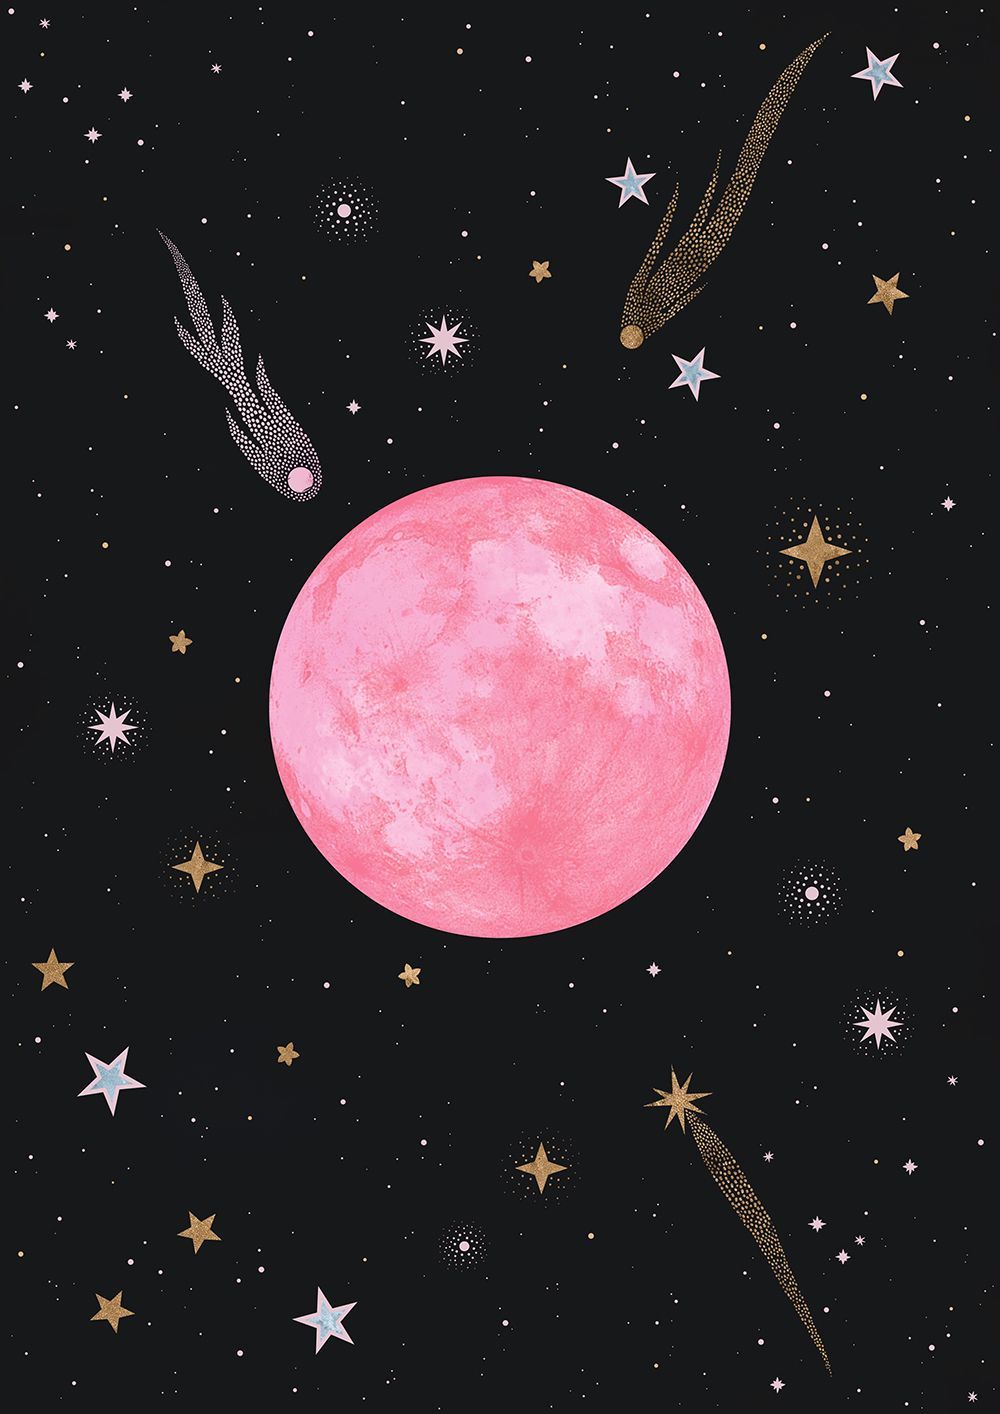 Free download Carly Watts Illustration Strawberry Moon space moon